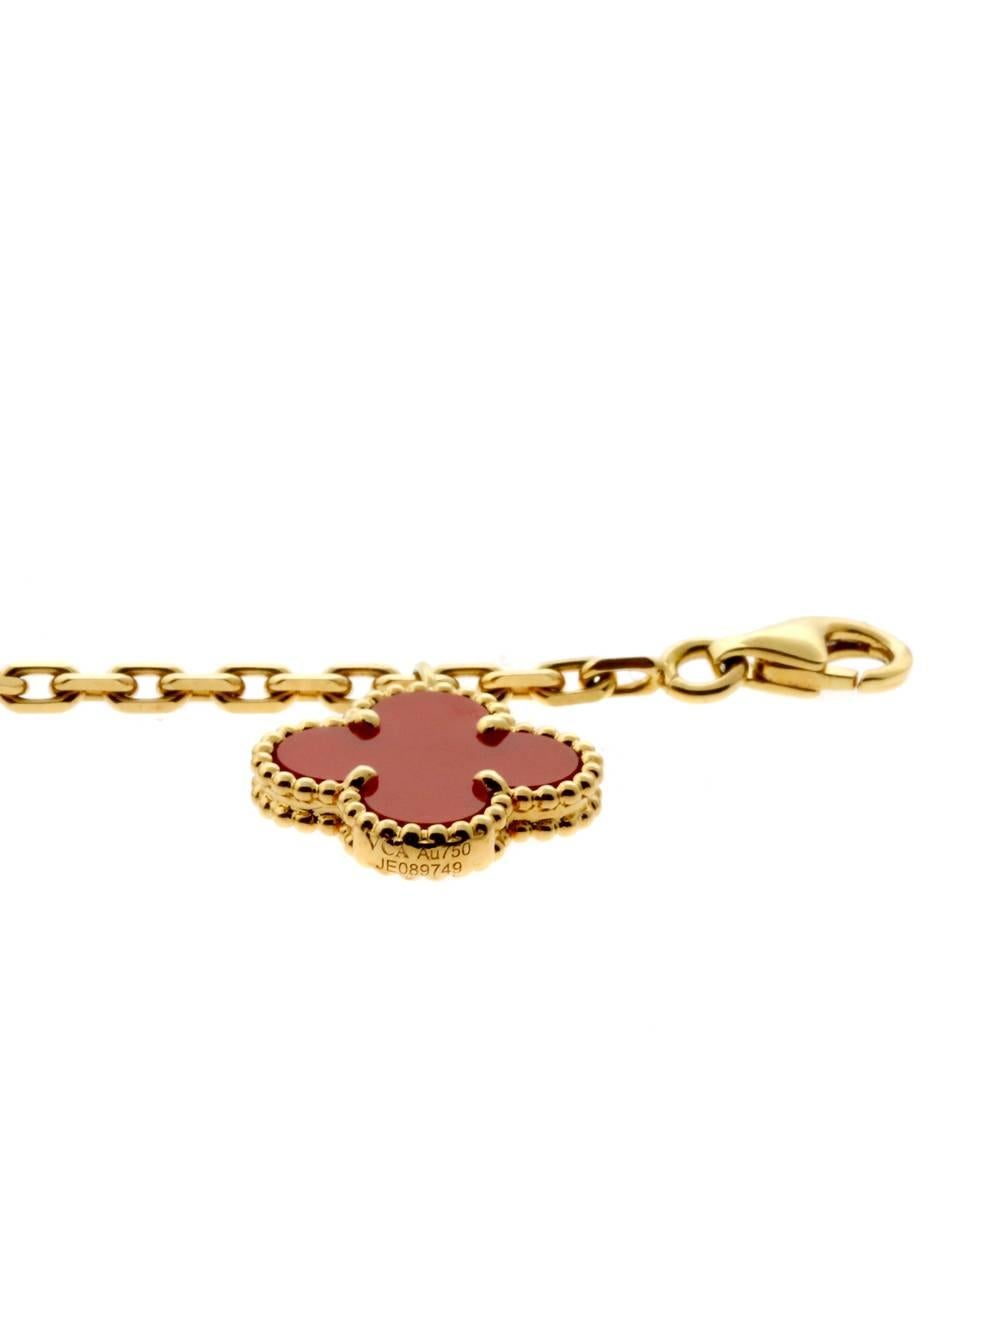 Van Cleef & Arpels bracelet in 18k yellow gold features the classic Alhambra motif. Three carnelian and two tiger-eye stones drape along the wrist charm-like.

Bracelet Length: 7 3/4